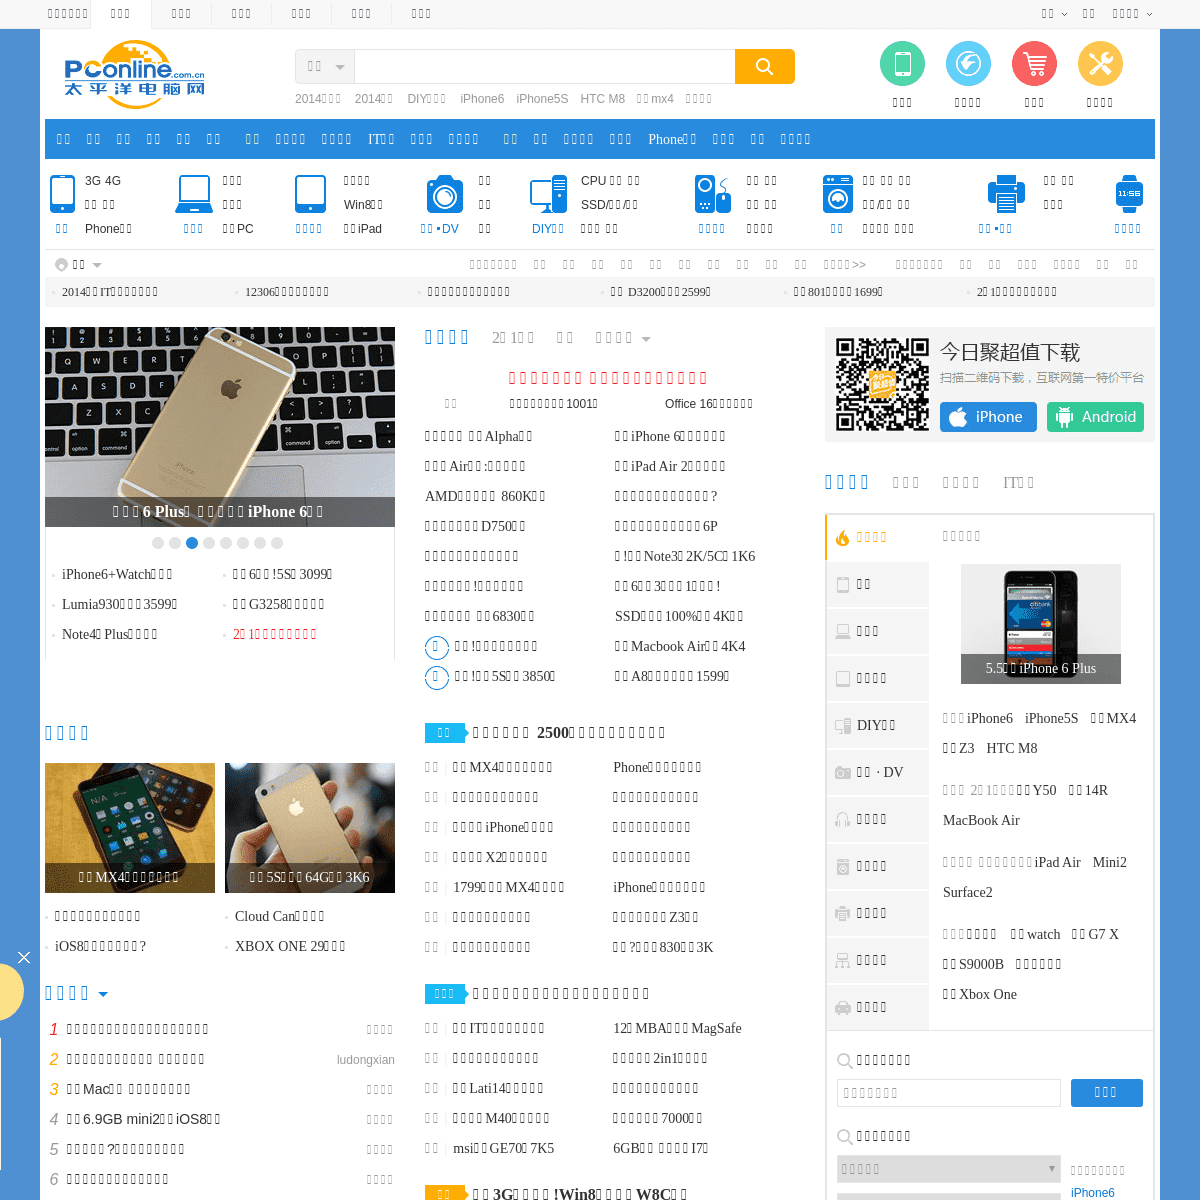 A complete backup of pc.com.cn